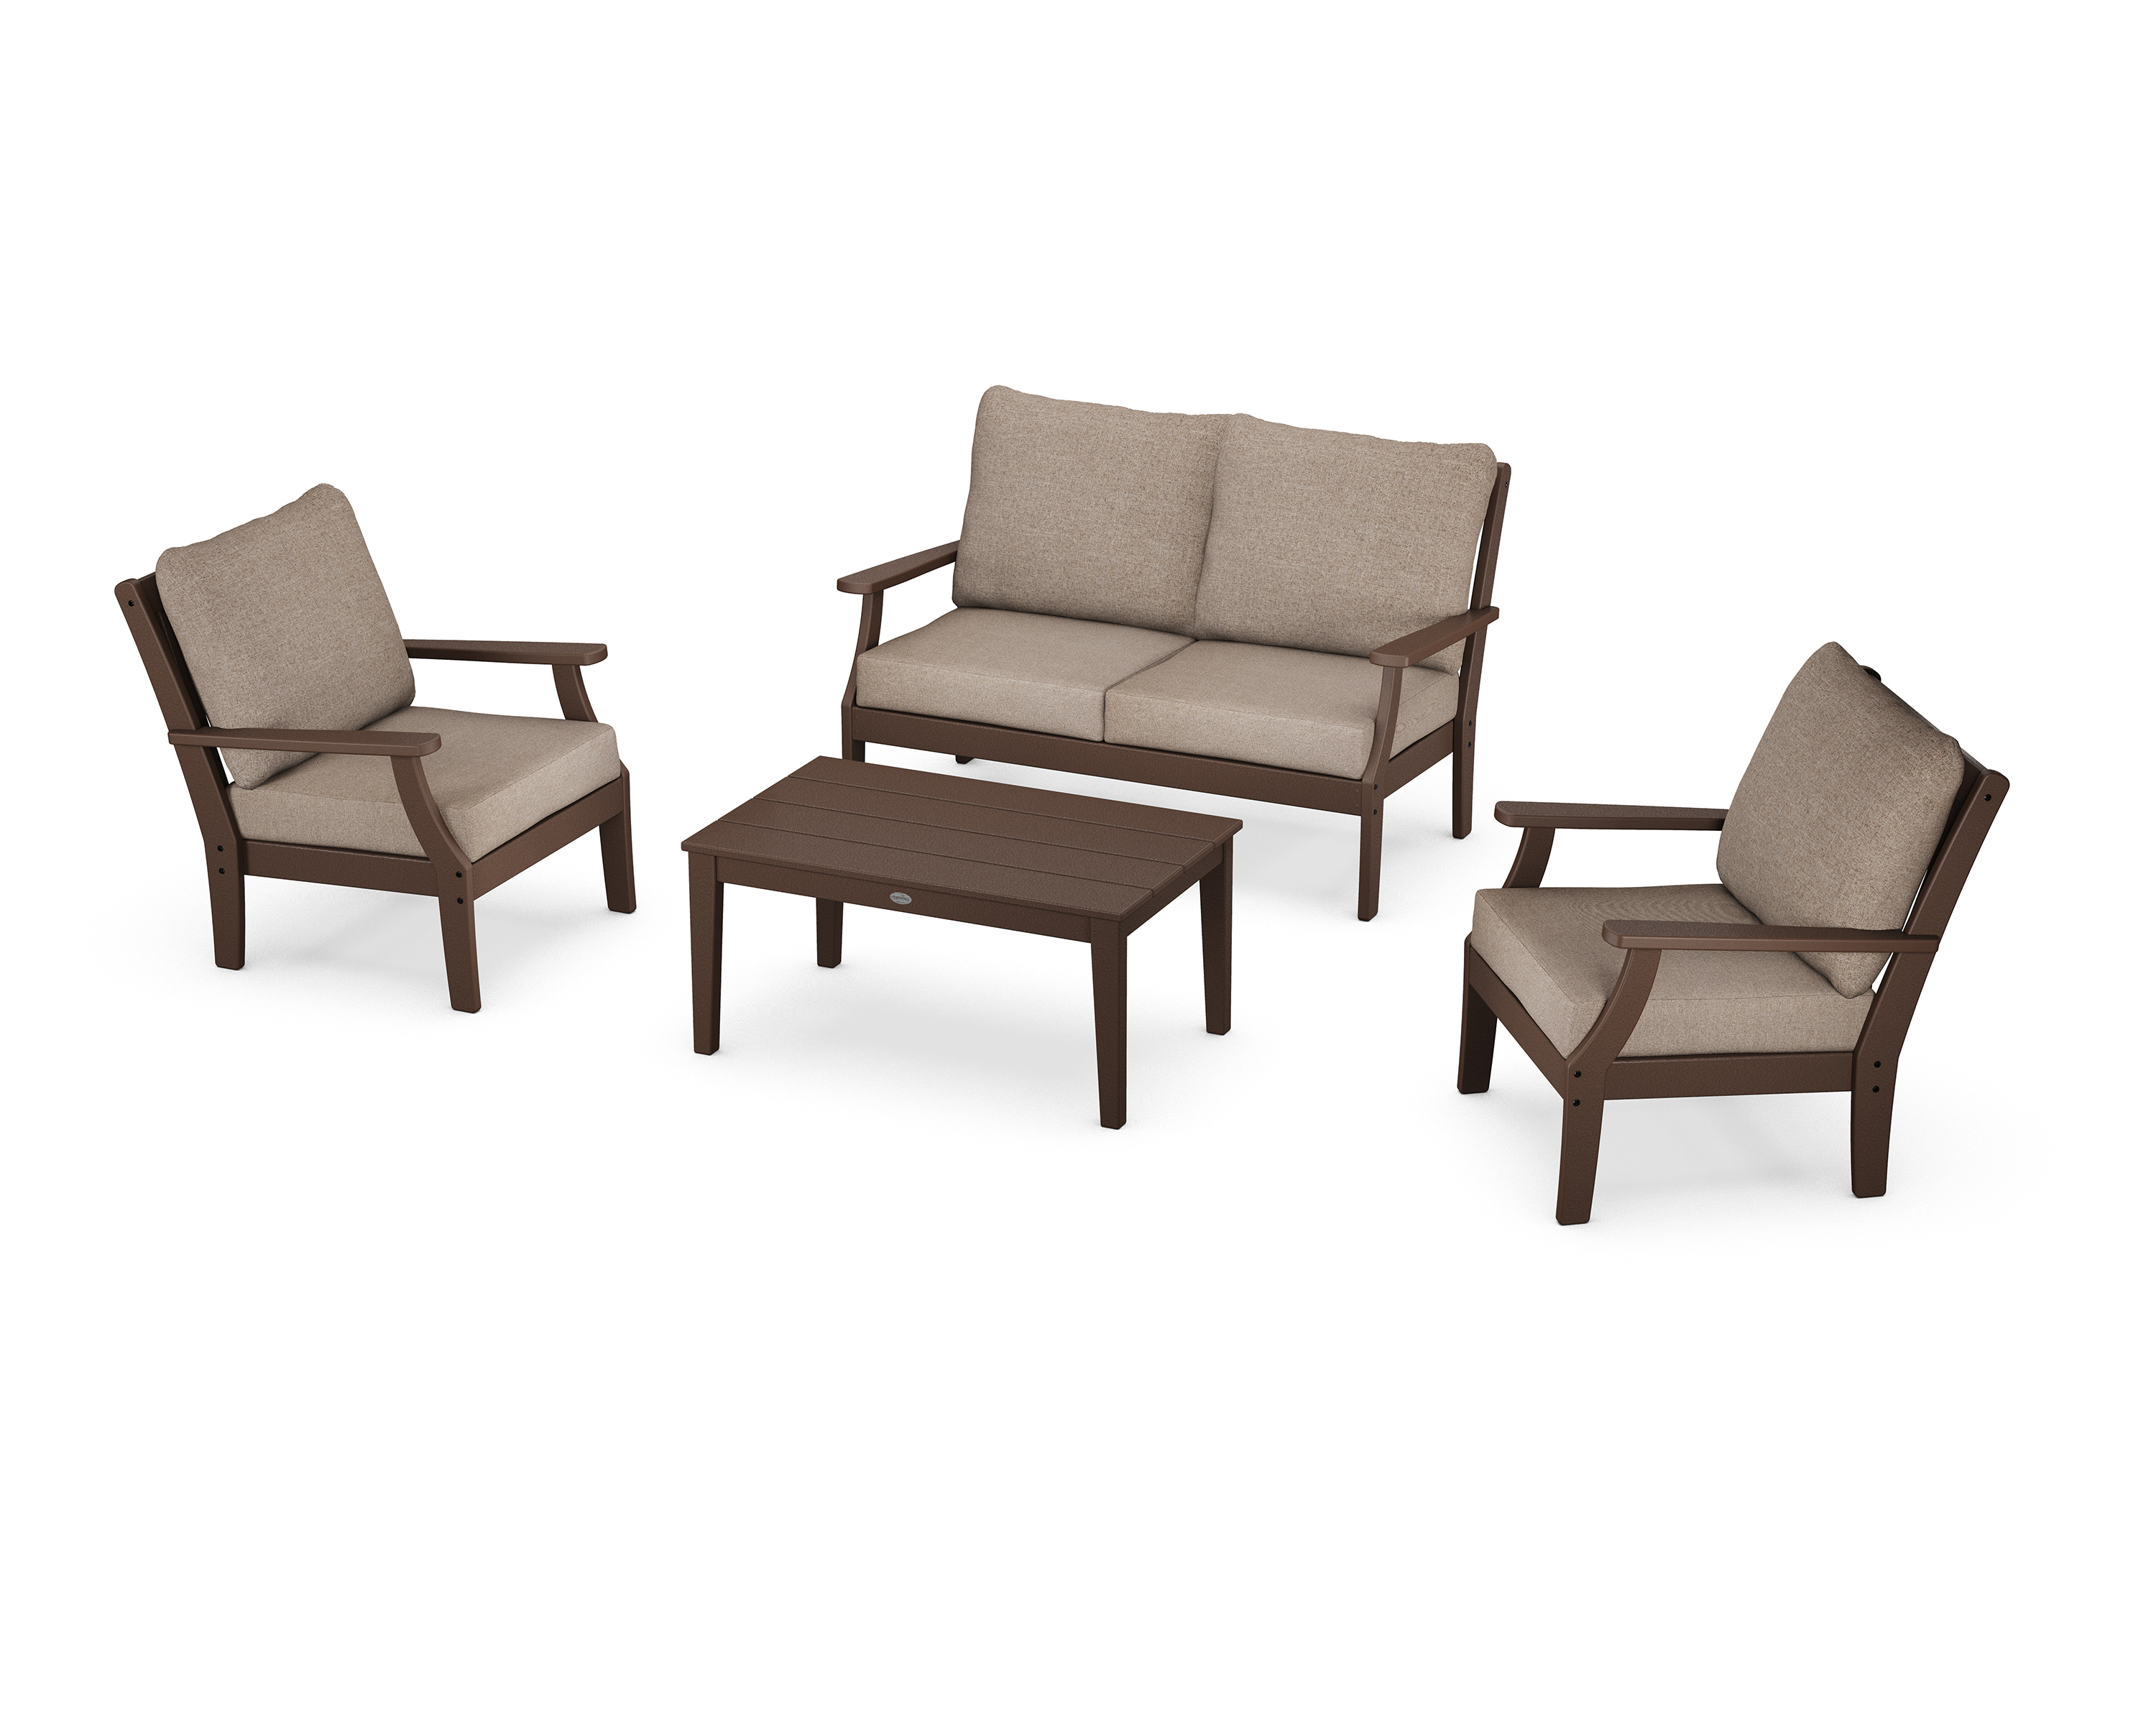 braxton 4-piece deep seating chair set in mahogany / spiced burlap product image